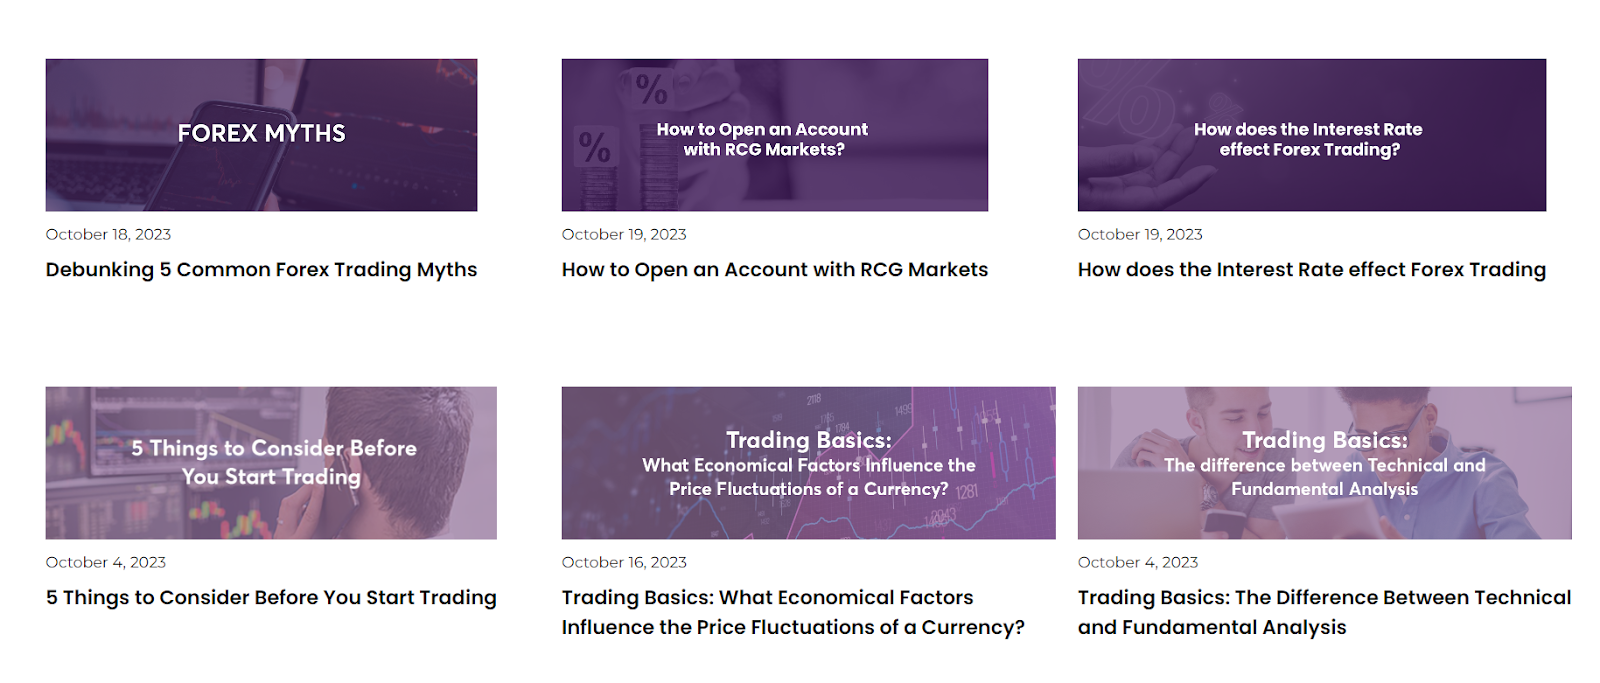 RCG Markets: educational resources